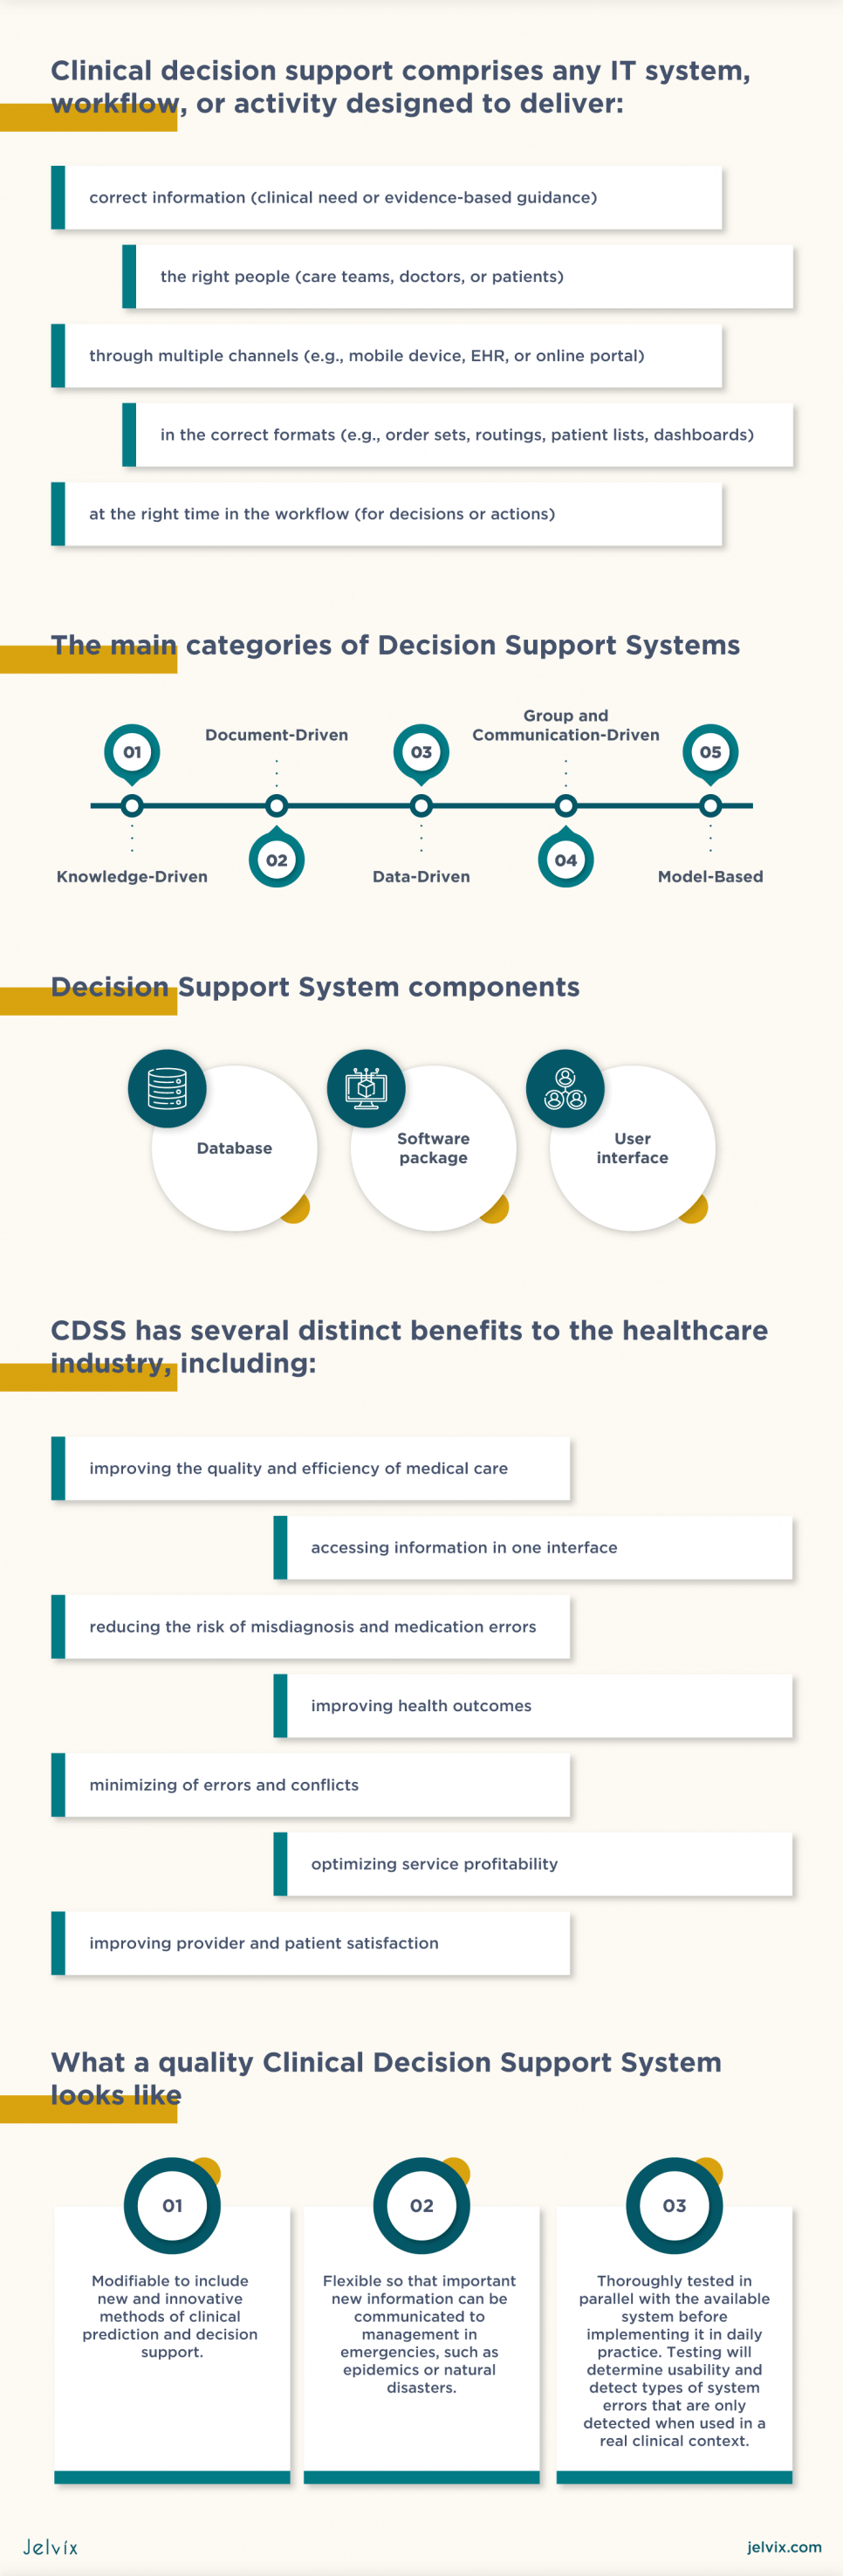 CDSS - clinical decision support system